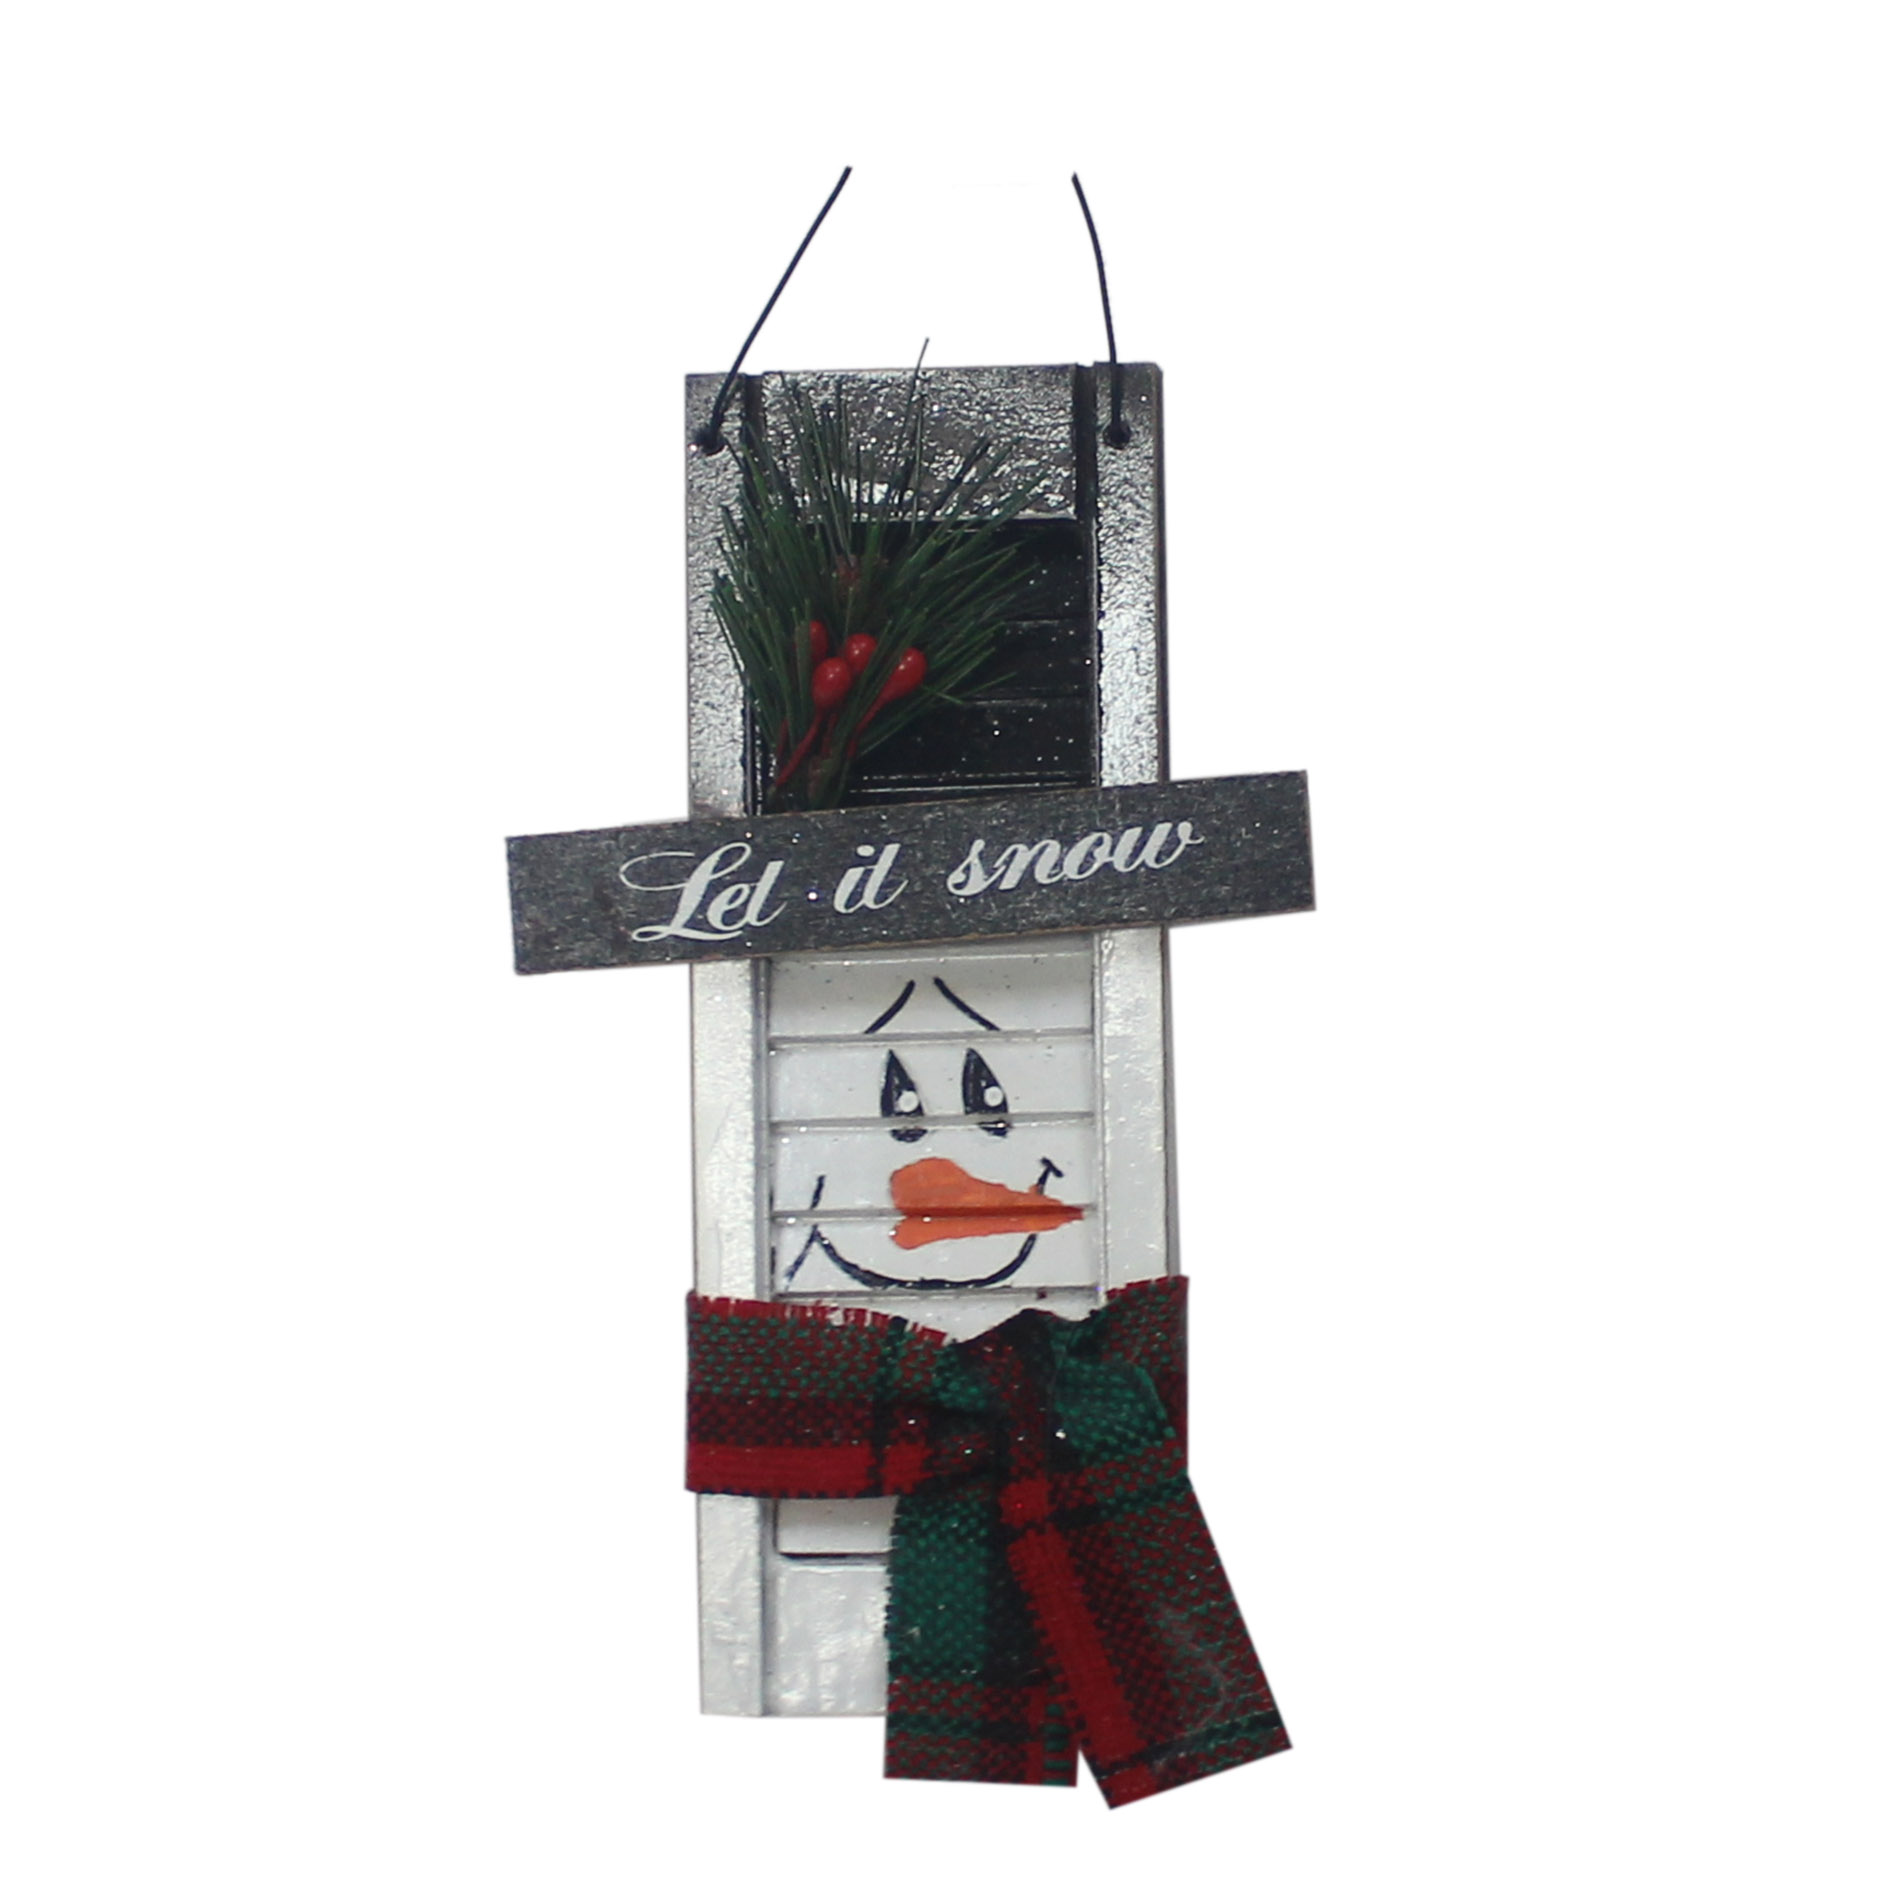 Jaclyn Smith 4" x 6" Shutter Snowman Tree Ornament with Scarf